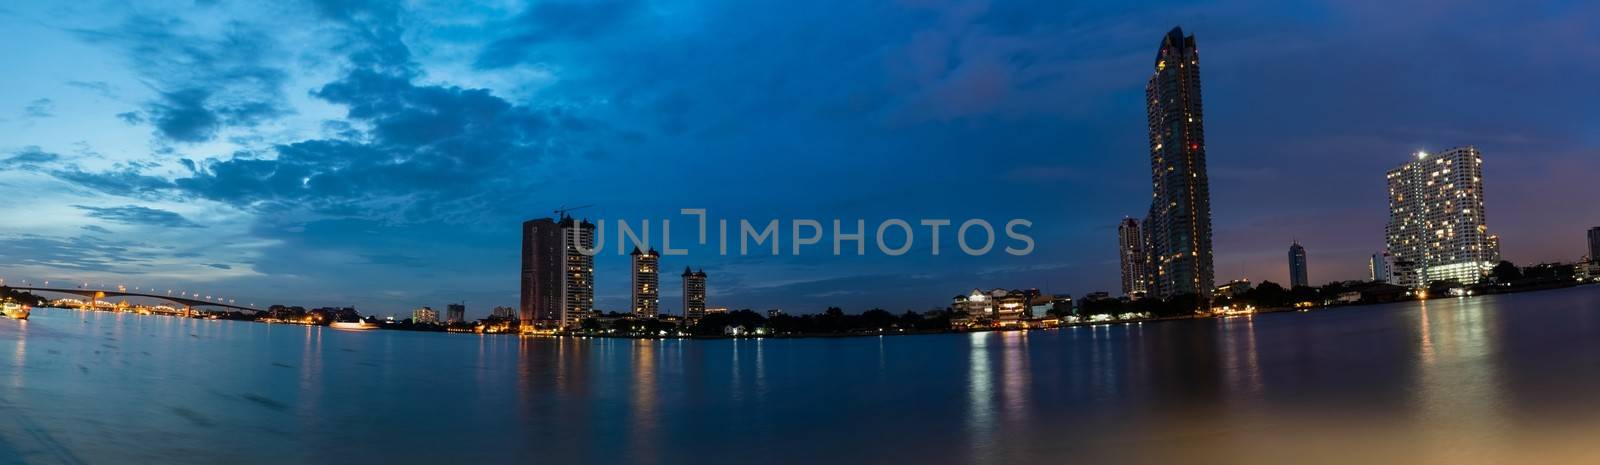 Bangkok city scape, taken at twilight zone on a cloudy day